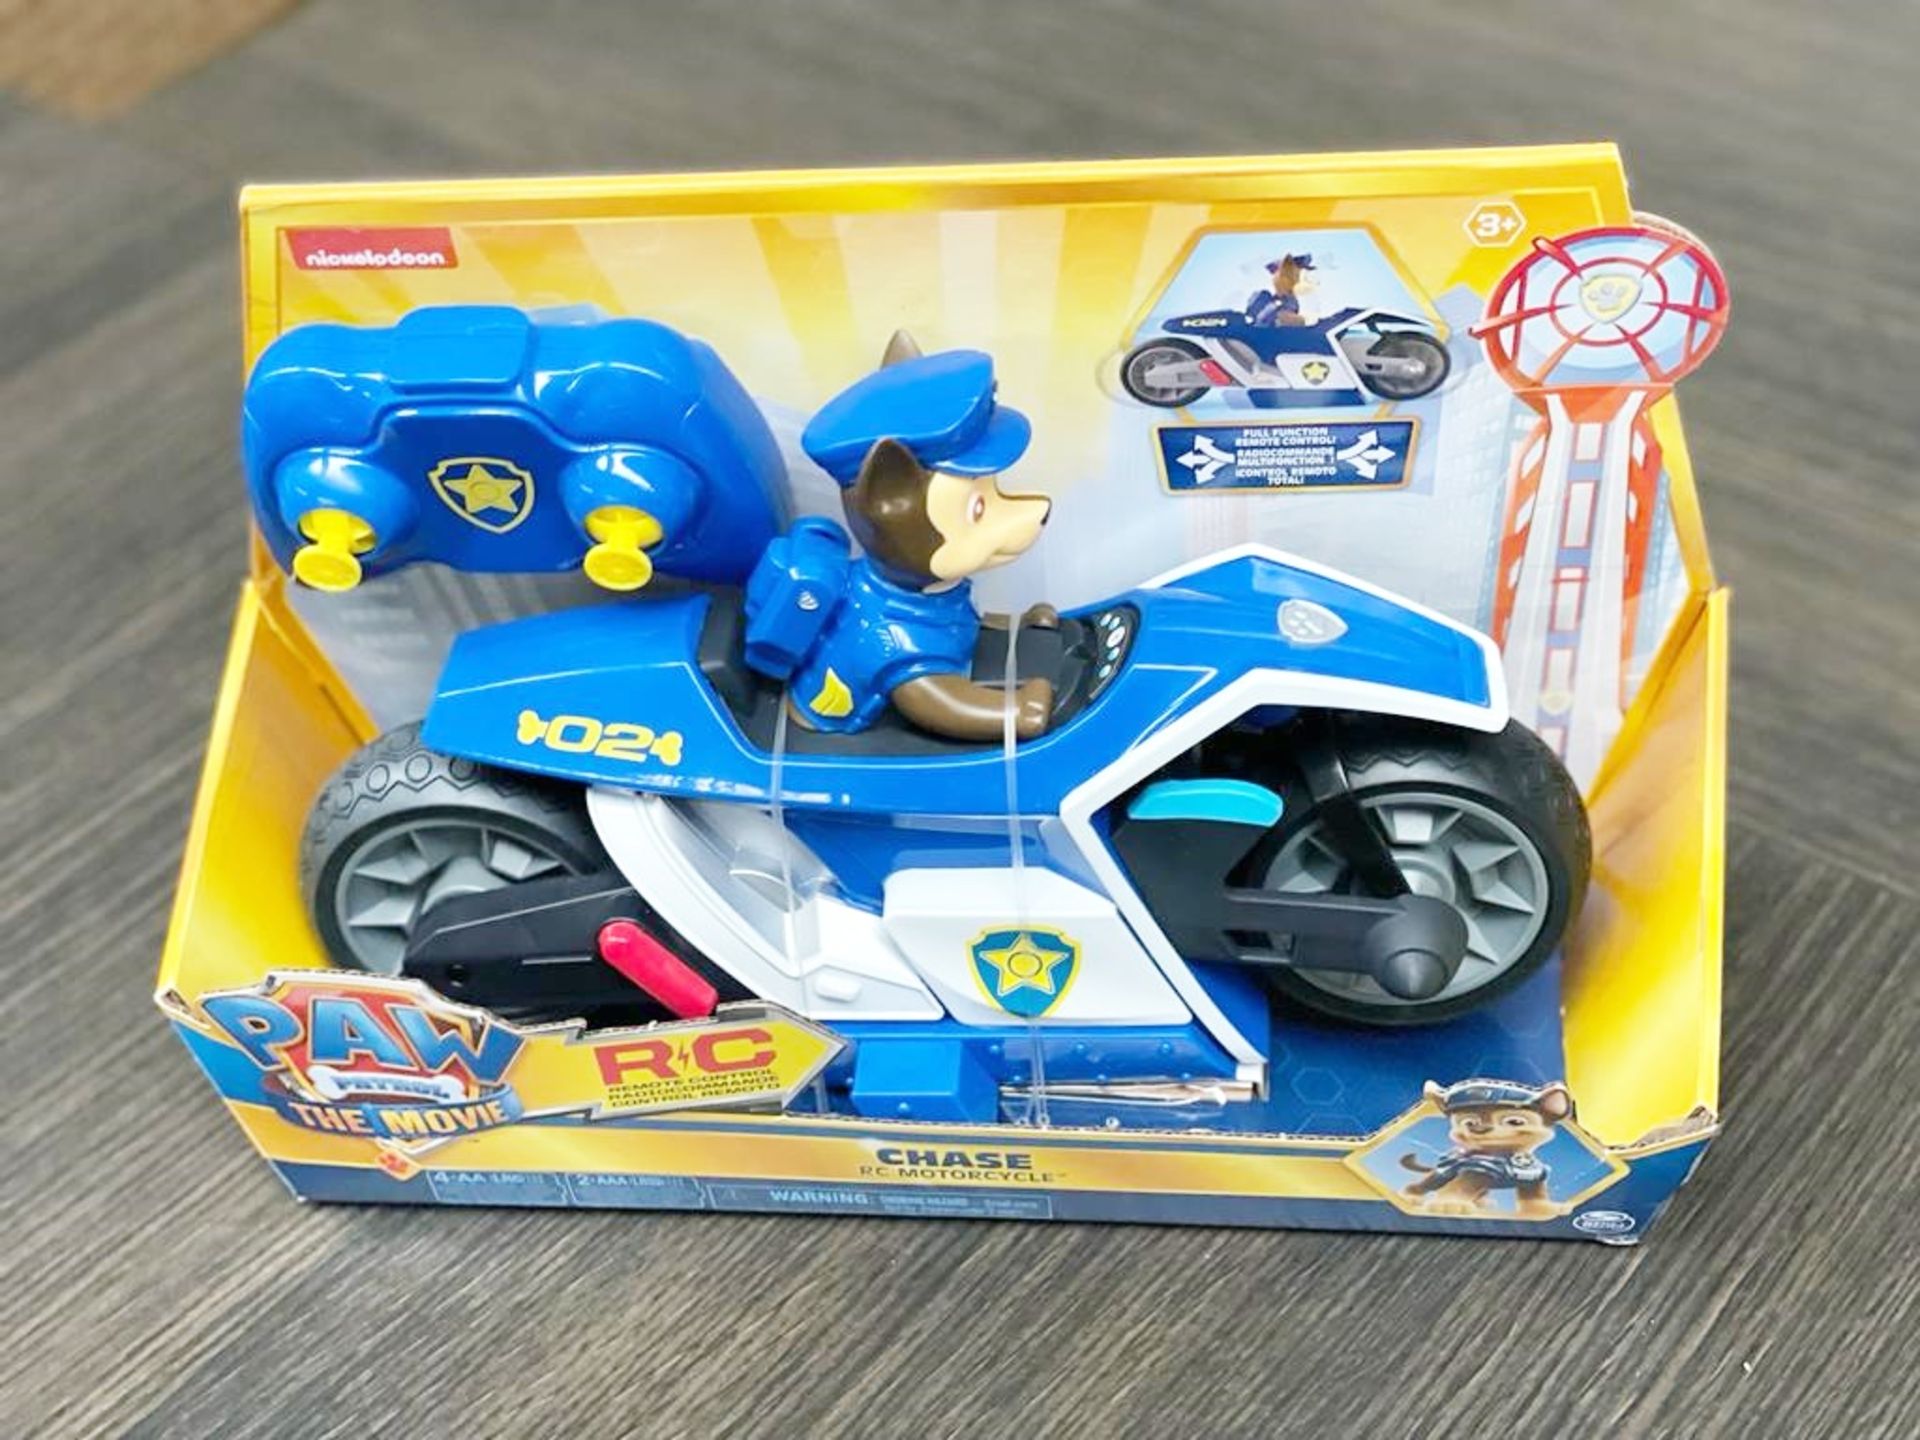 1 x Paw Patrol The Movie Chase RC Motorcycle - Brand New - CL987 - Ref: HRX124  - Location: - Image 2 of 2